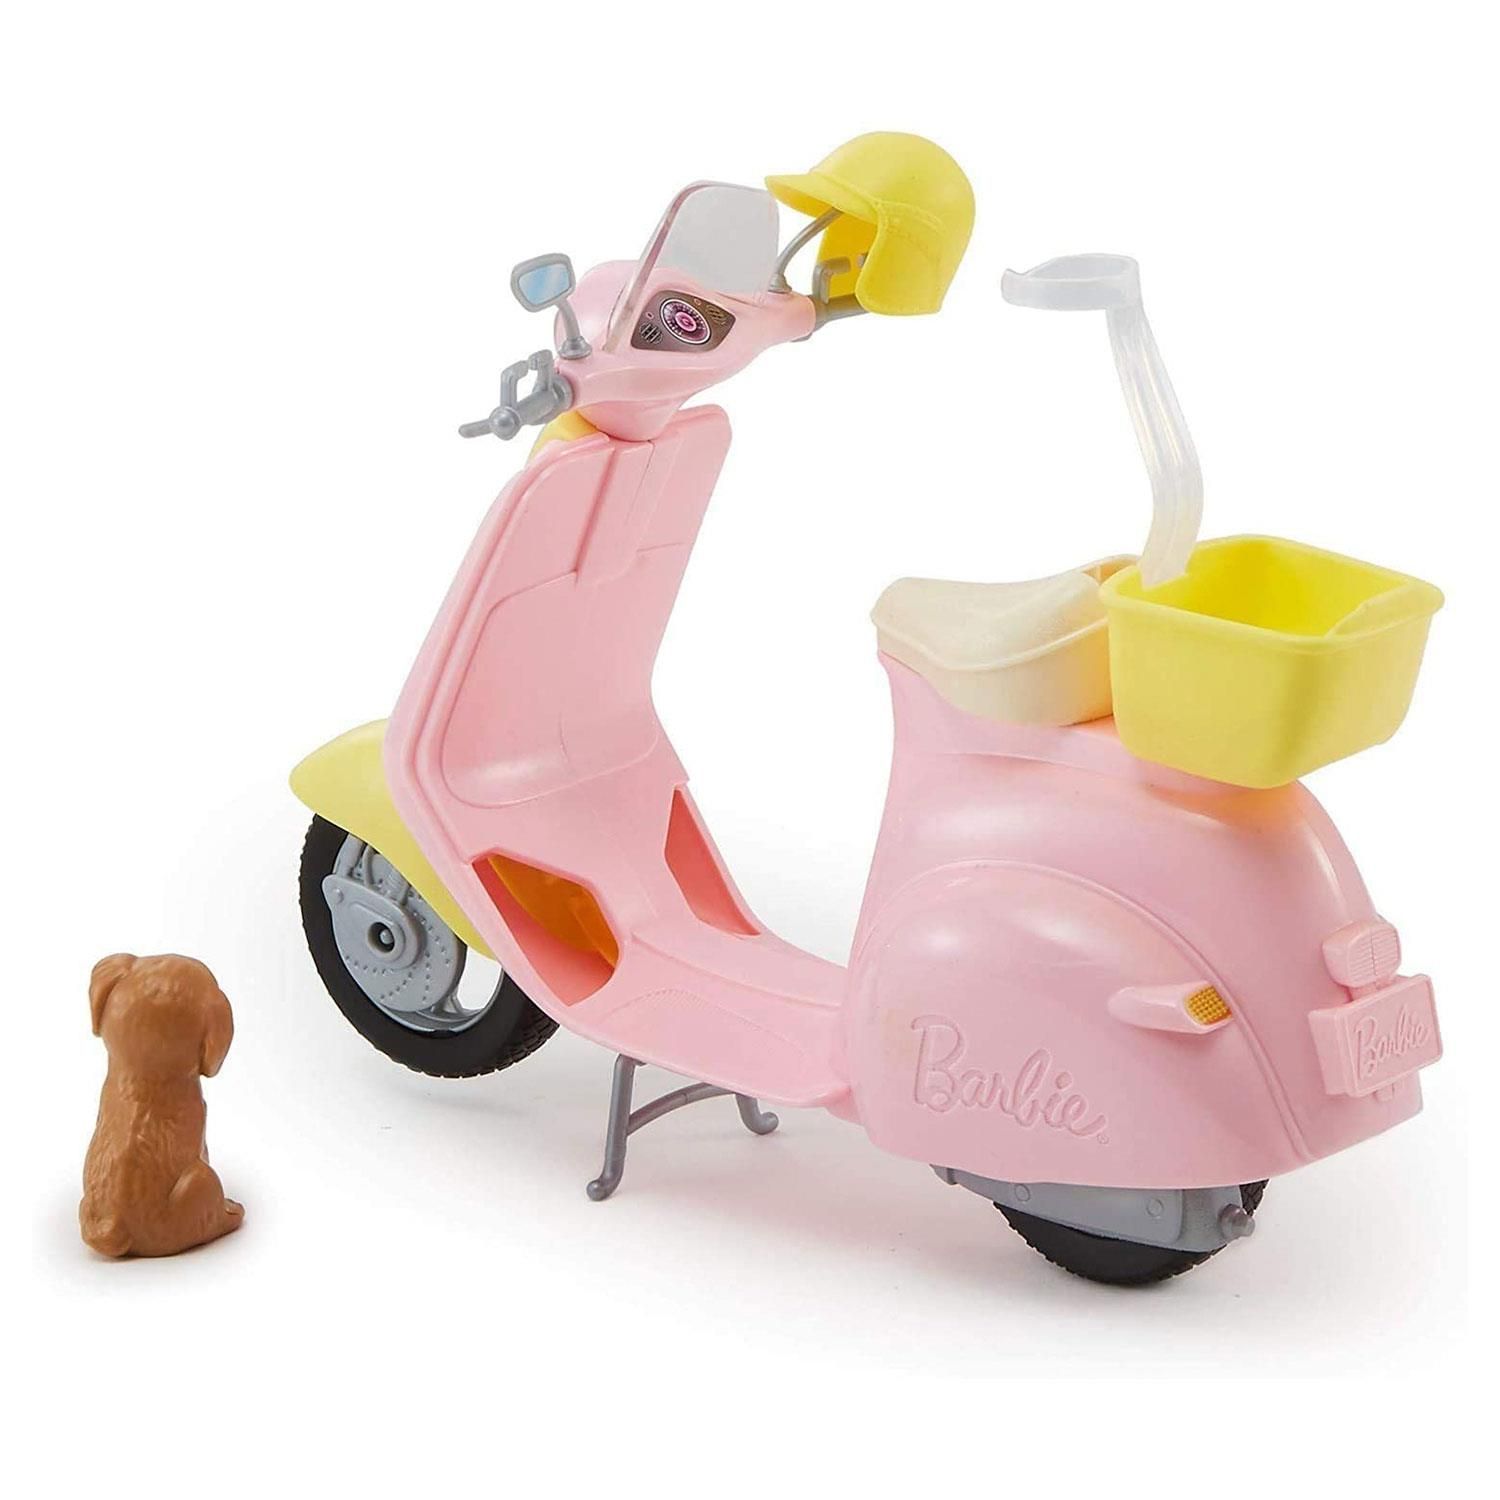 Scoot into fun with this Barbie moped. It comes with a pet friend who's always ready to ride! Designed in pink and yellow with silvery accents, the moped is trendy and stylish. Place Barbie doll (sold separately) on the seat where a clip holds her in place. Lift up the kickstand and push to head into imagination. Bring along the puppy in the yellow basket on the back. And a yellow helmet for the Barbie doll lets her ride safely in style. Whether you are going for a short ride or driving into adventure, this moped is ready to roll! Includes Barbie moped with basket, puppy, and helmet; doll not included. Colors and decorations may vary.